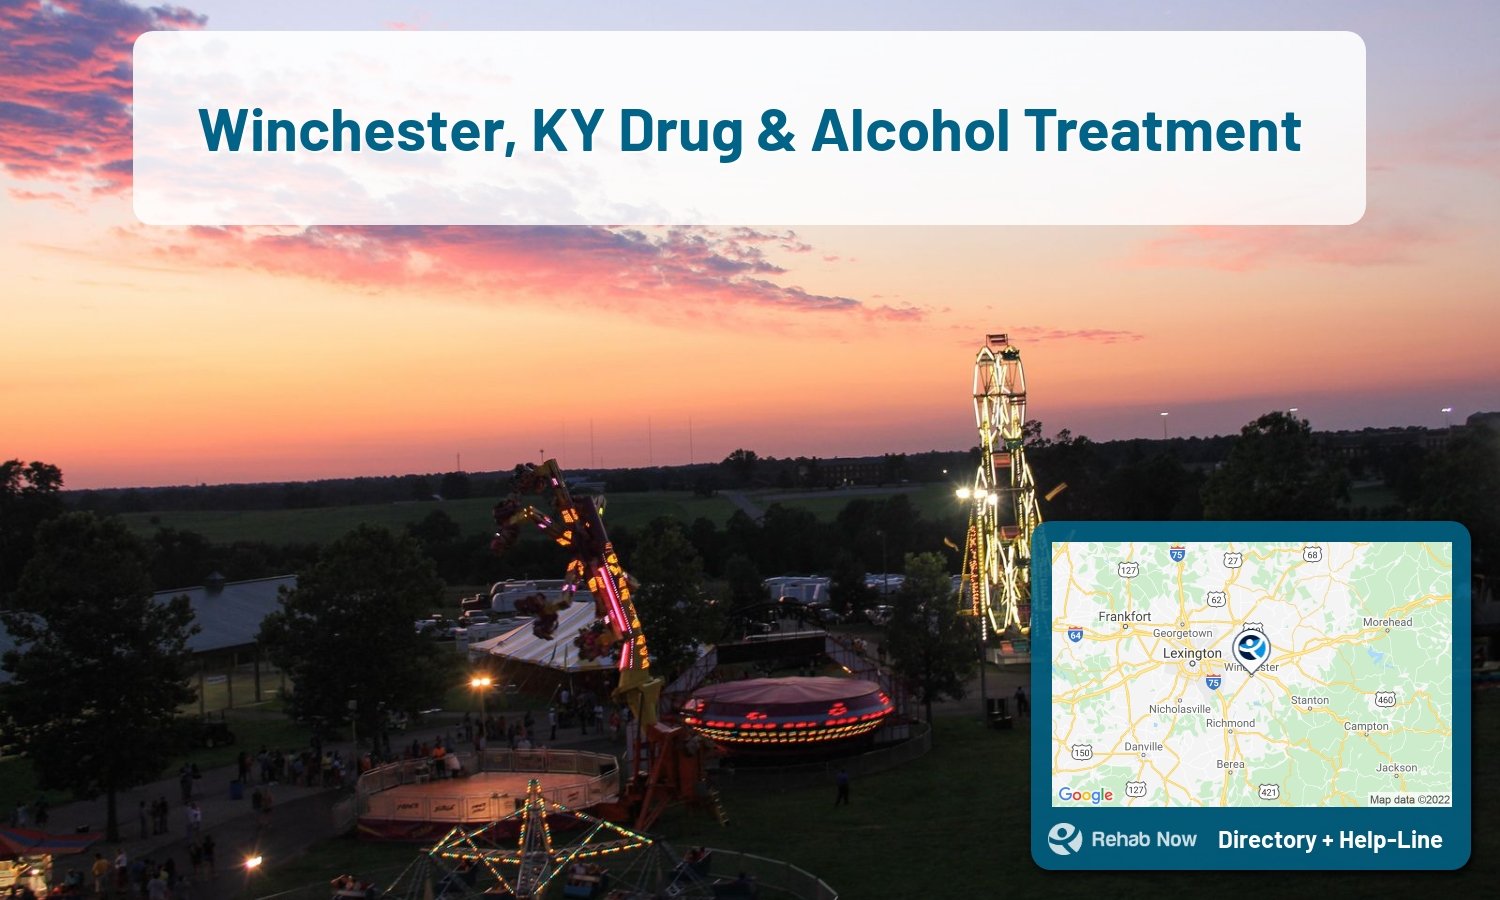 Winchester, KY Treatment Centers. Find drug rehab in Winchester, Kentucky, or detox and treatment programs. Get the right help now!